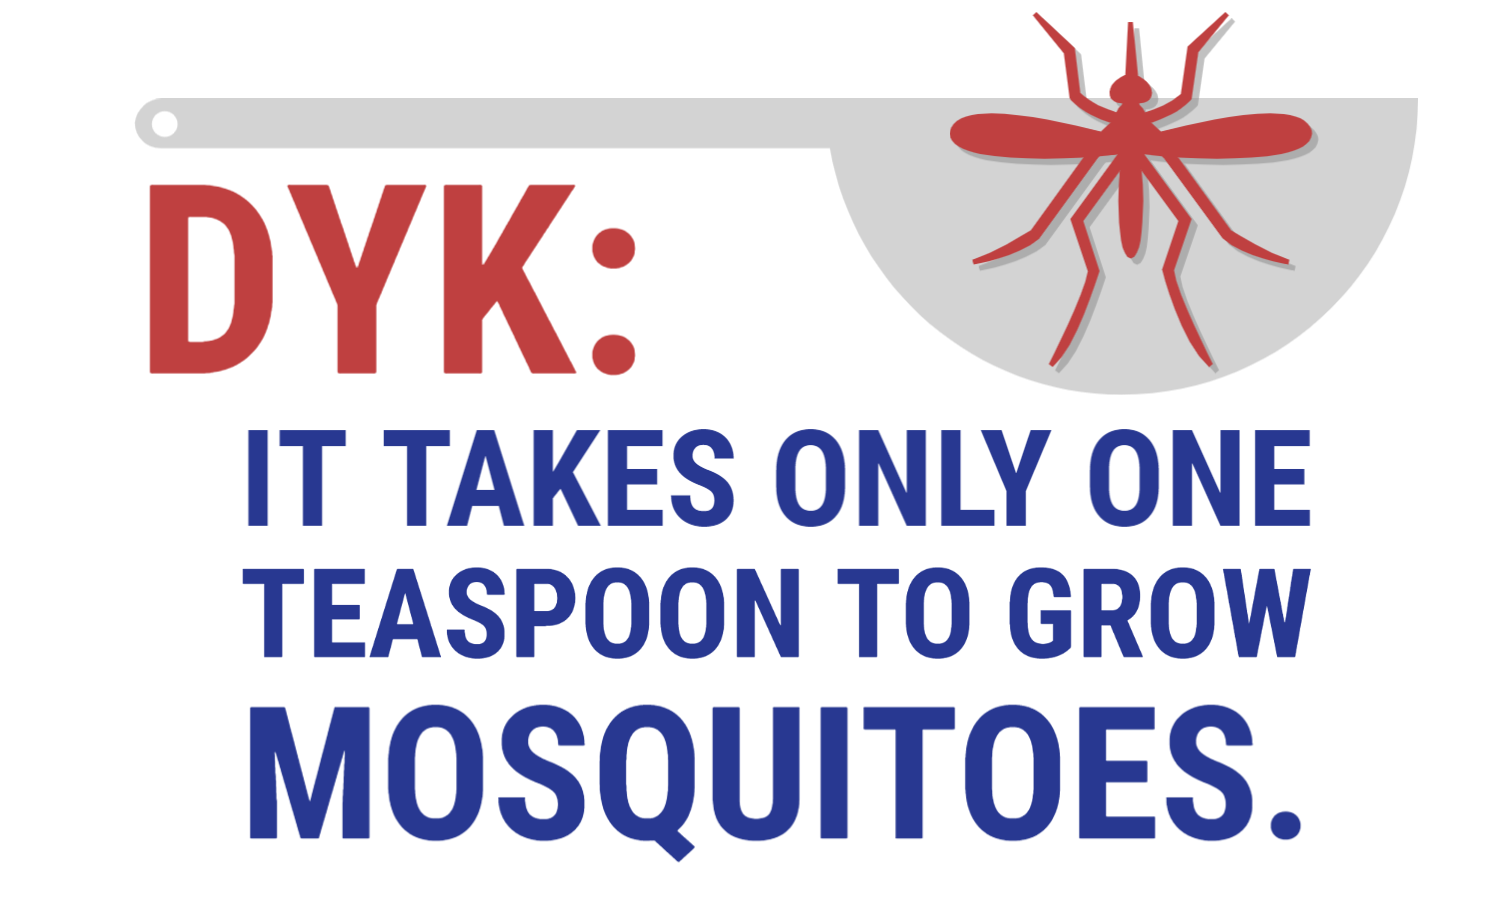 DKY: IT TAKES ONLY ONE TEASPON TO GROW MOSQUITOES. A mosquito layered on top of a measuring spoon.